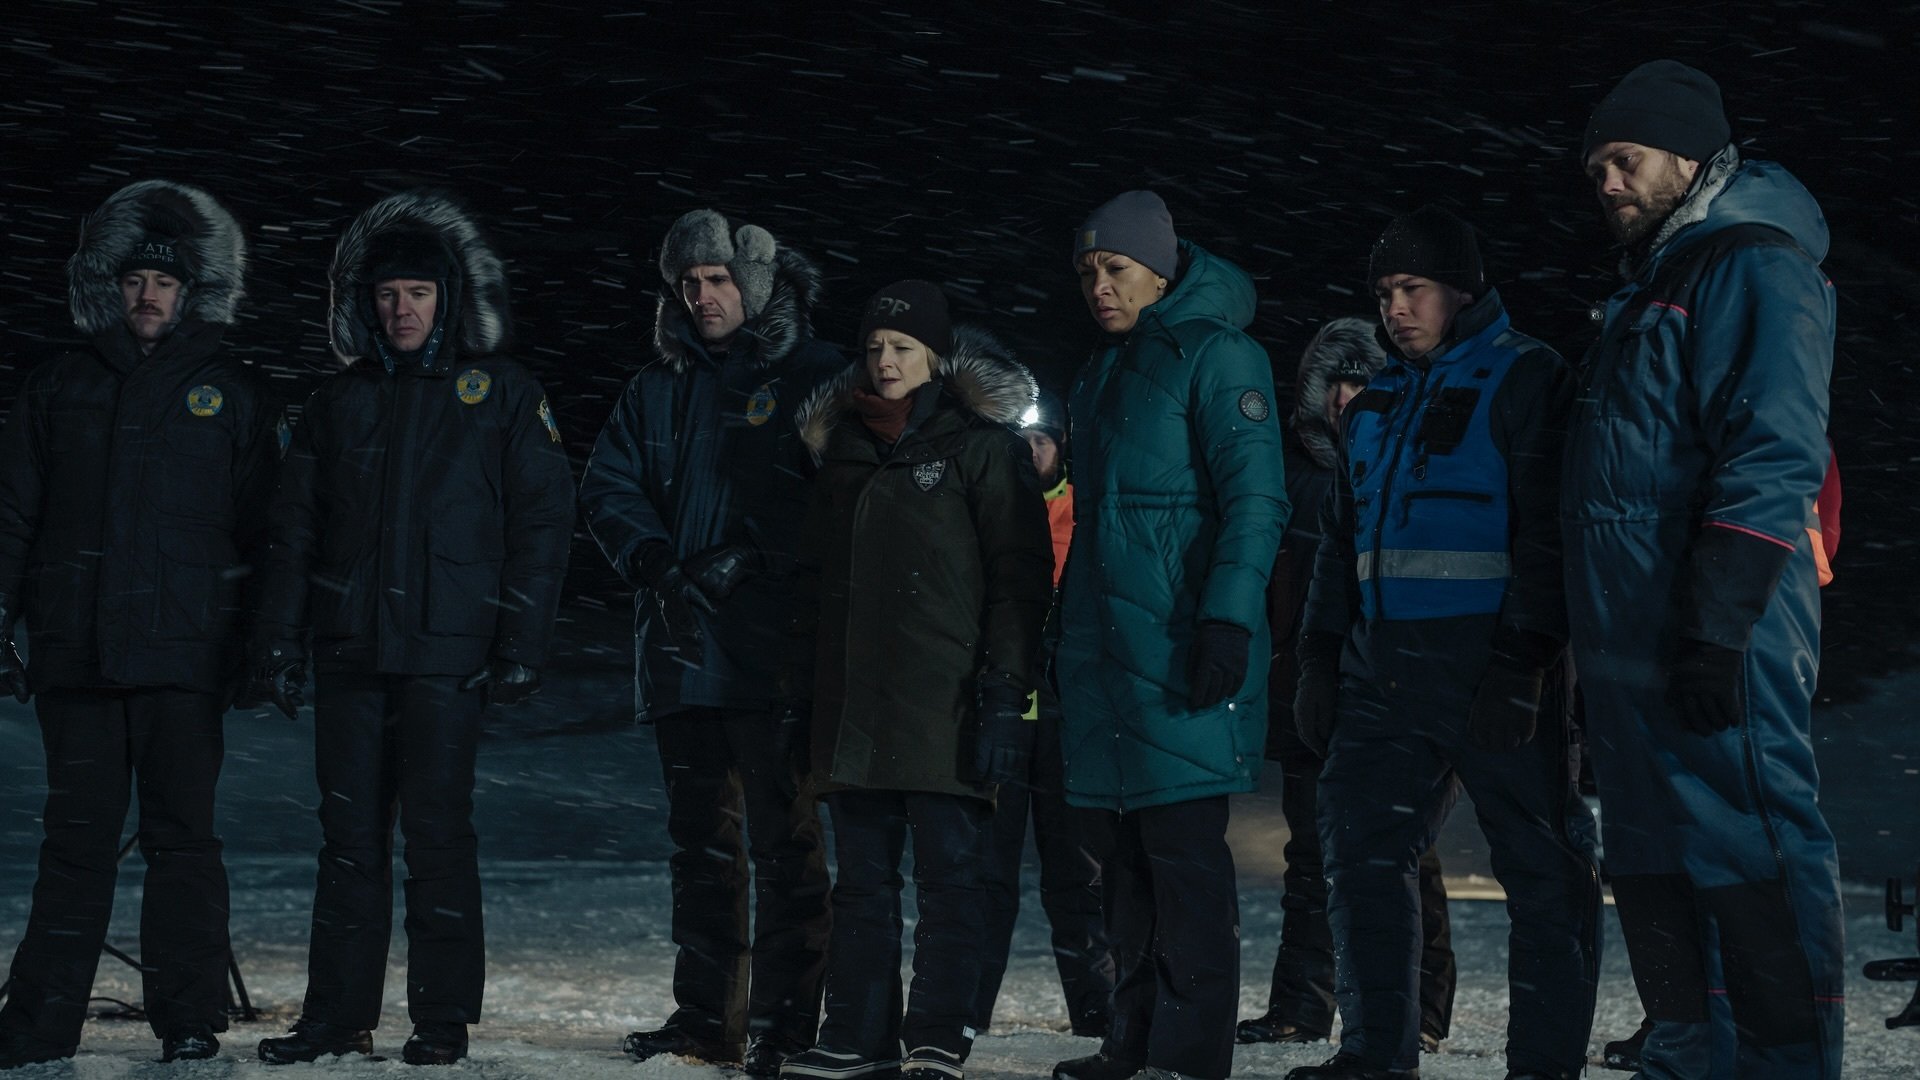 A group of men and women in police uniforms stand in the snow.